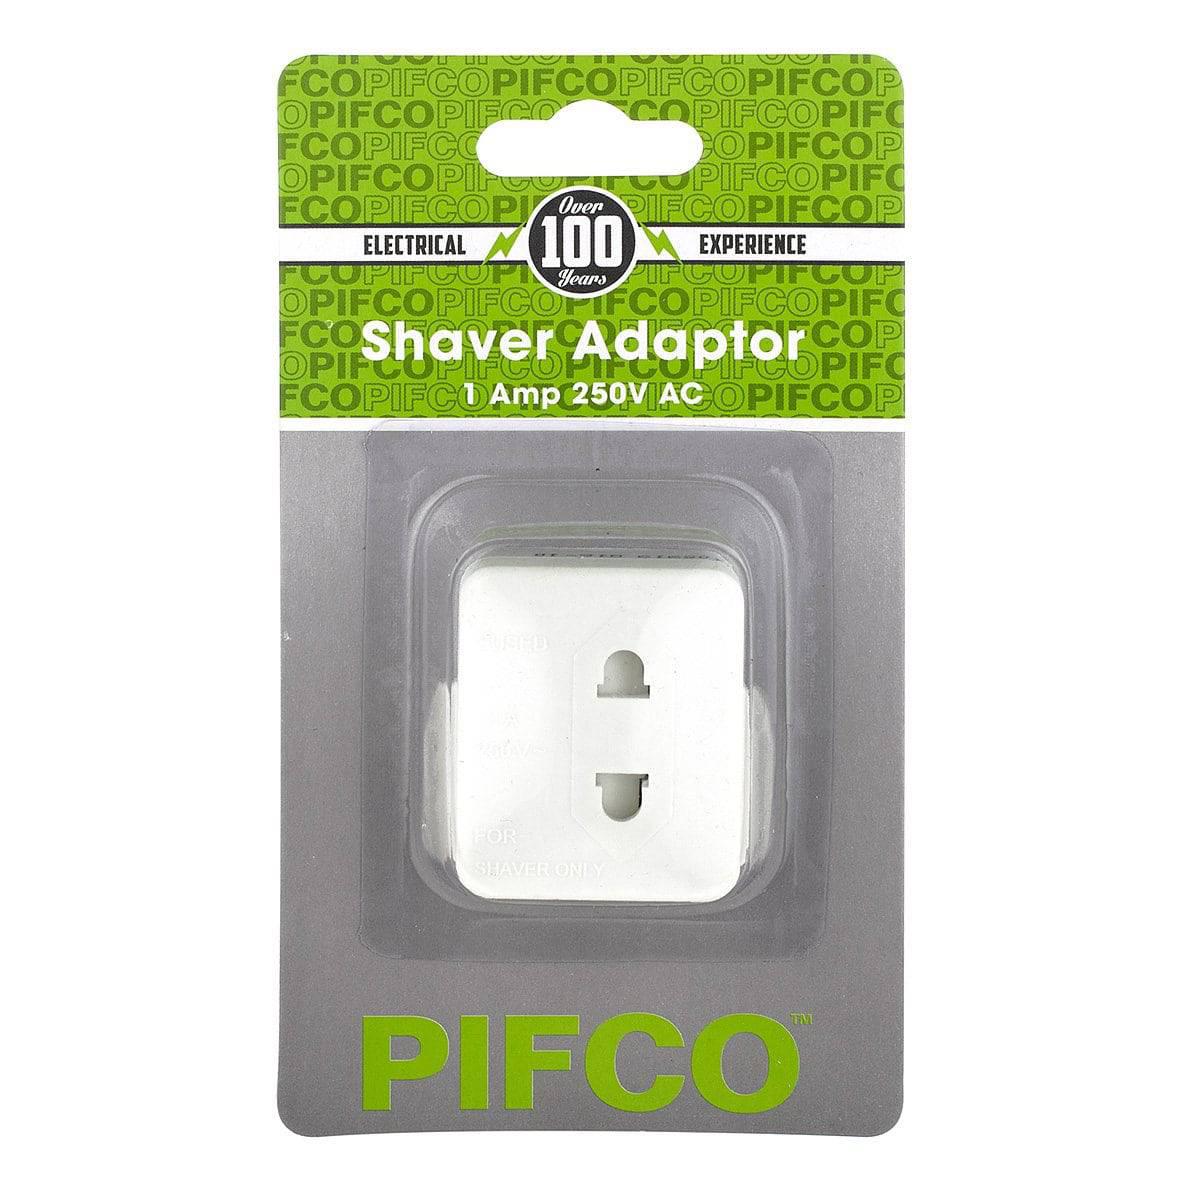 Pifco Shaver Adapter Plug - 2 Pin to 3 Pin, Fits UK and Irish 1A Plugs - White - Healthxpress.ie